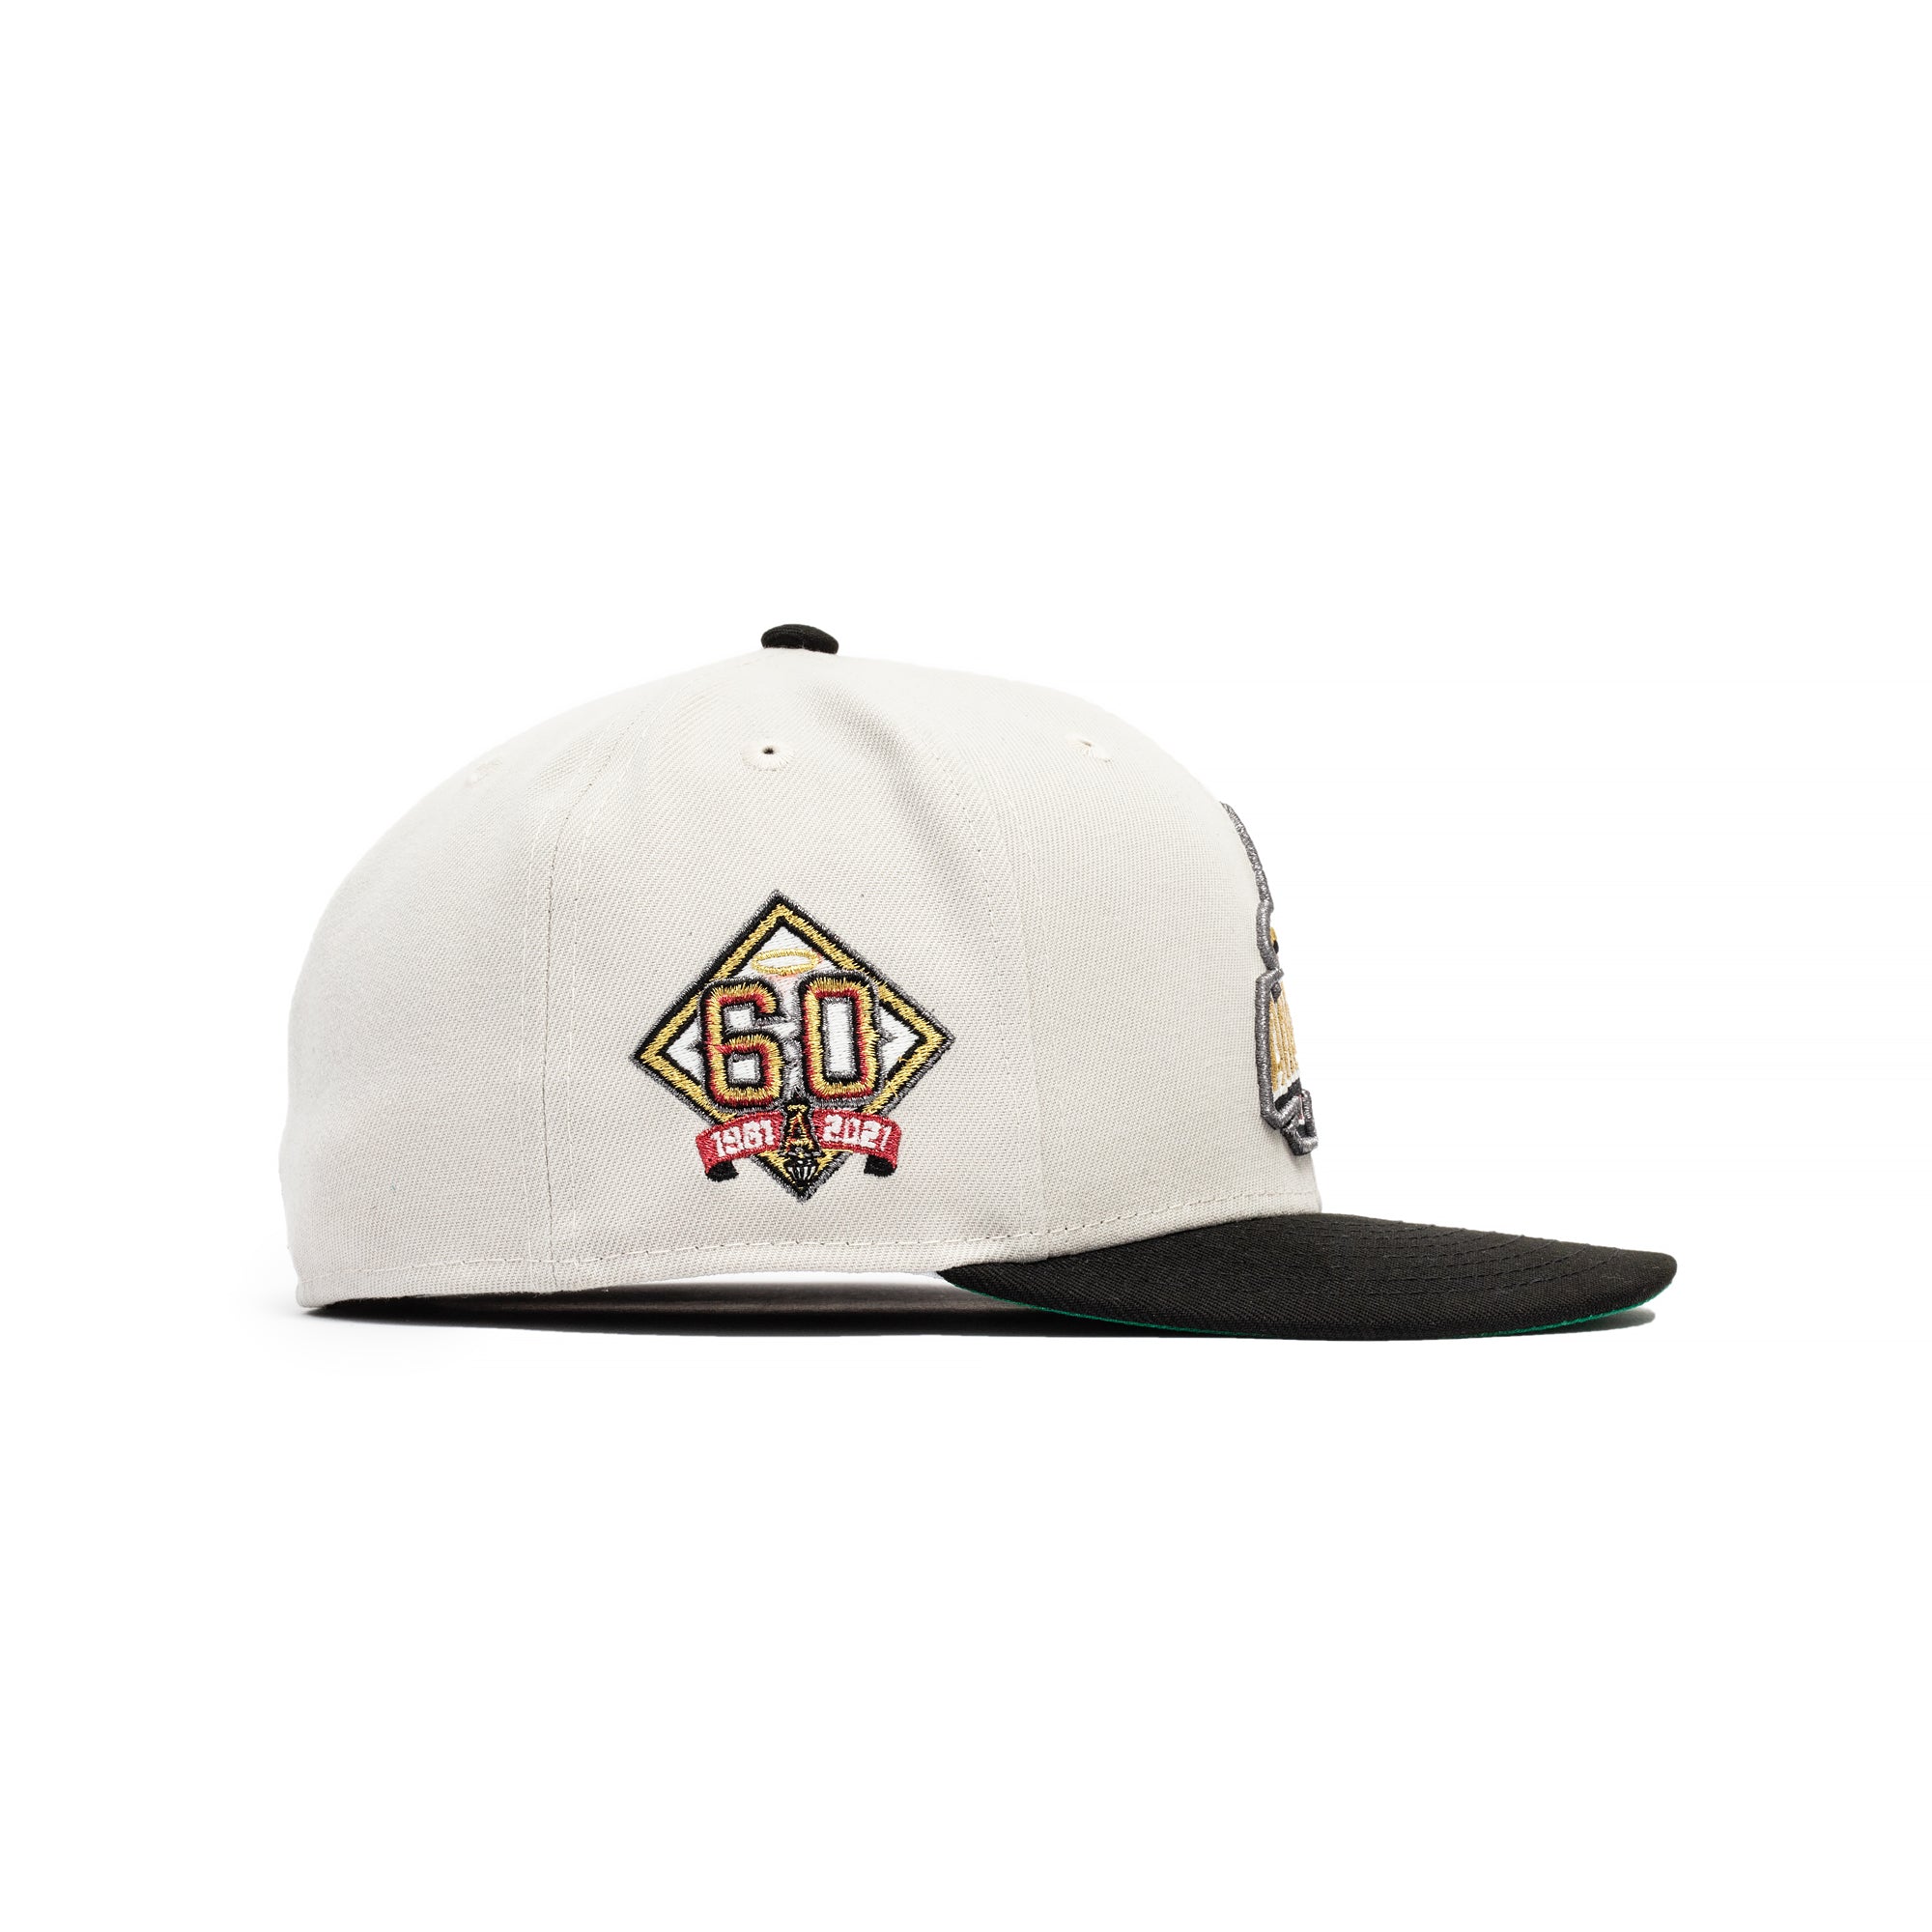 New Era 59FIFTY Anaheim Angels Fitted Hat